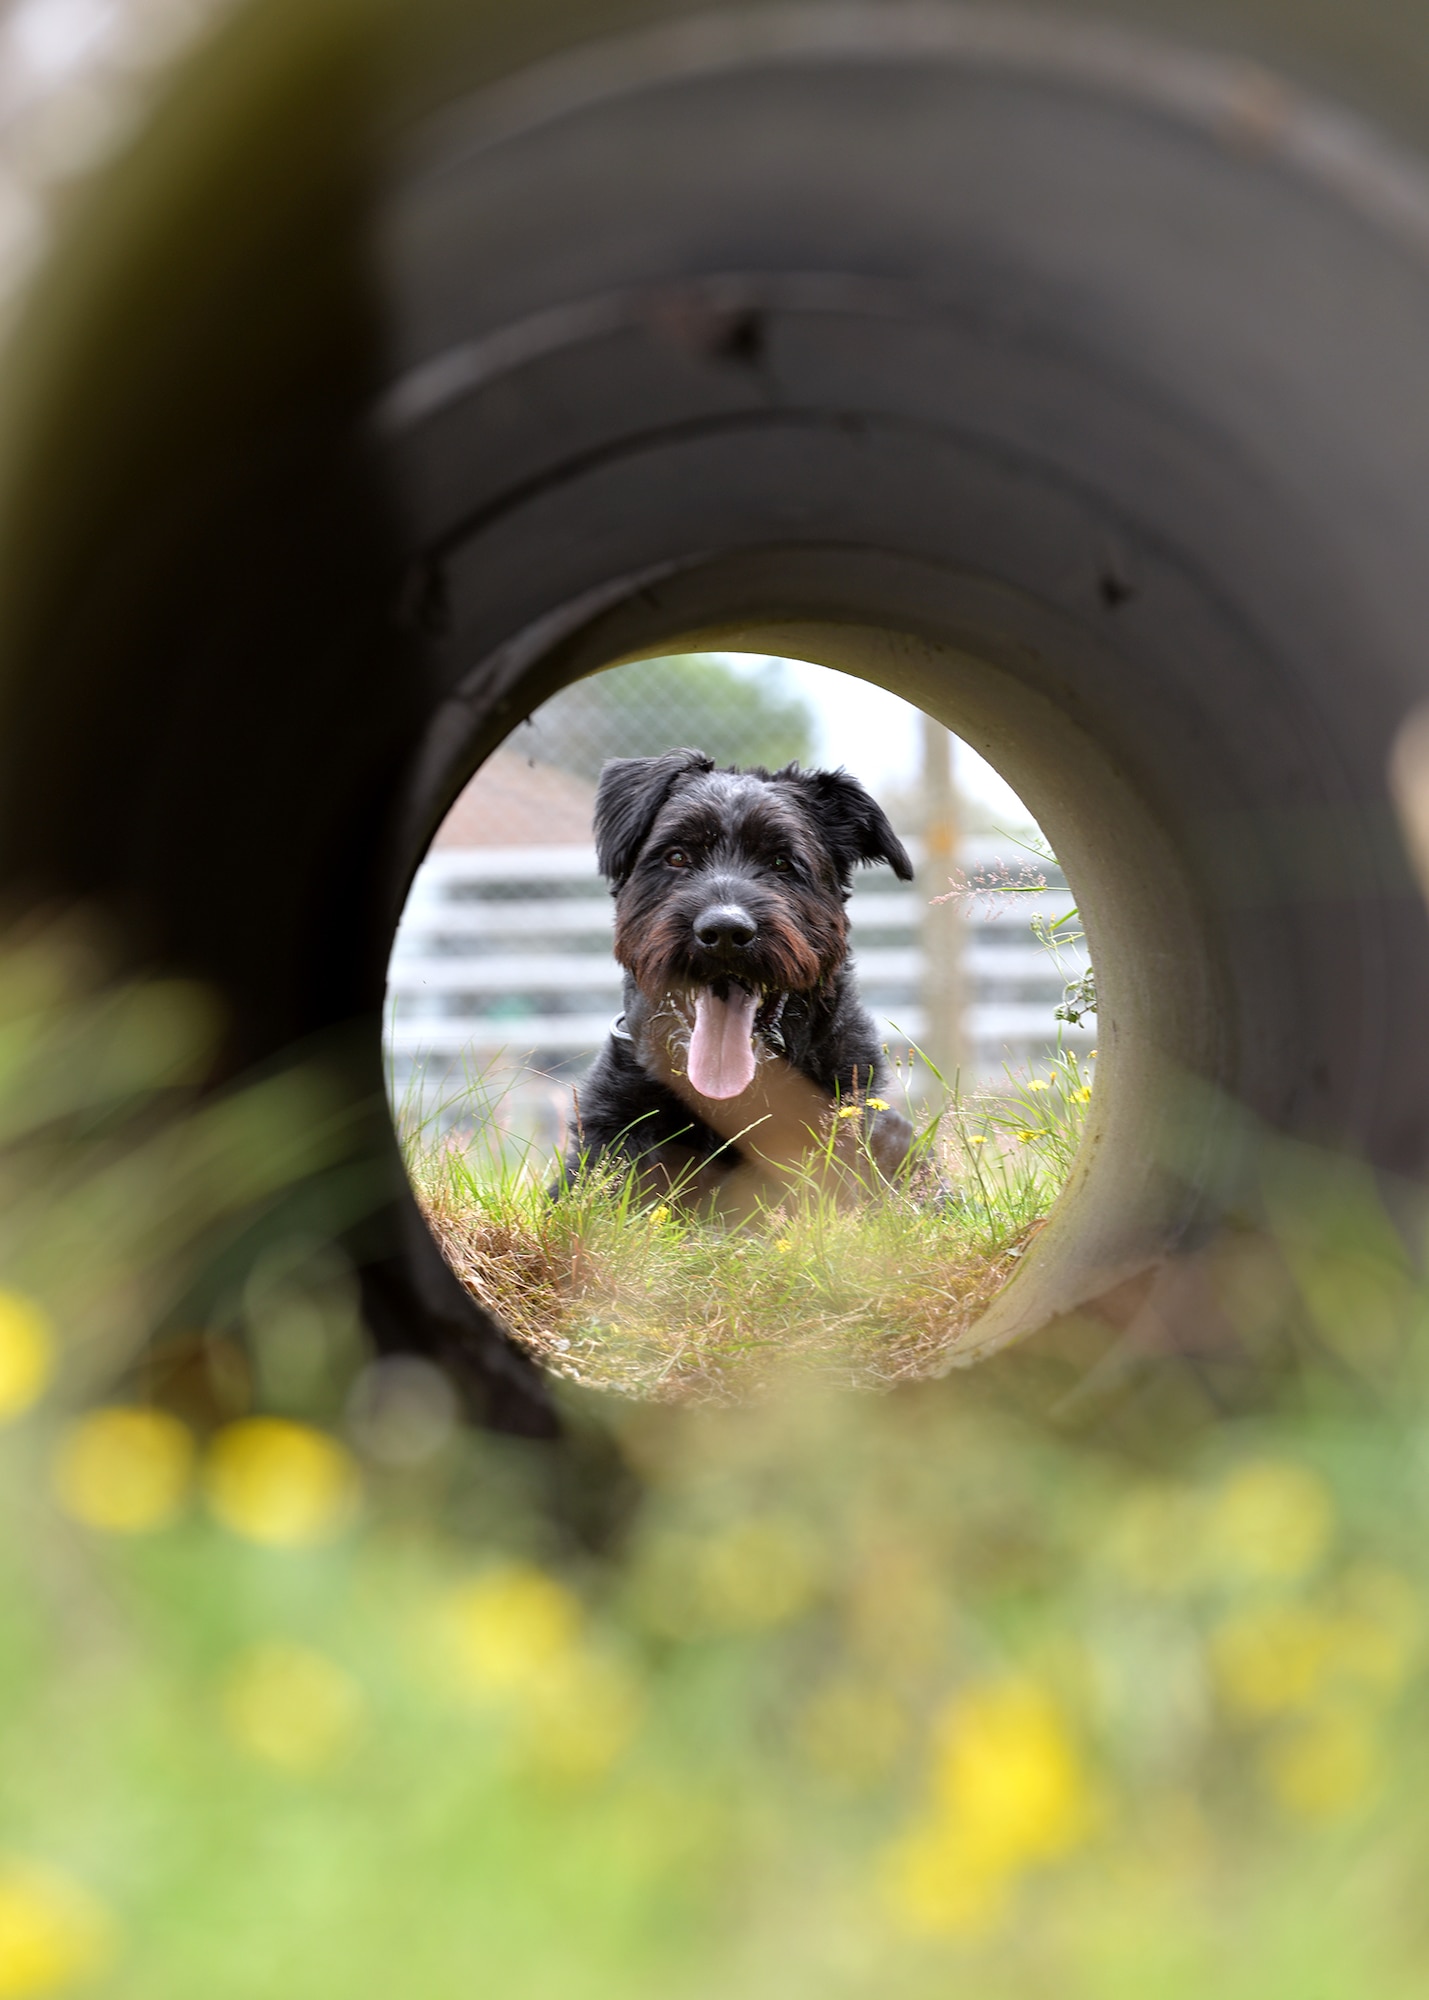 Military Working Dog Brock, 100th Security Forces Squadron, looks through a concrete pipe as he prepares to run through it during an obedience training session July 11, 2017, on RAF Mildenhall, England. Brock is the only Giant Schnauzer in the Department of Defense. (U.S. Air Force photo by Karen Abeyasekere)